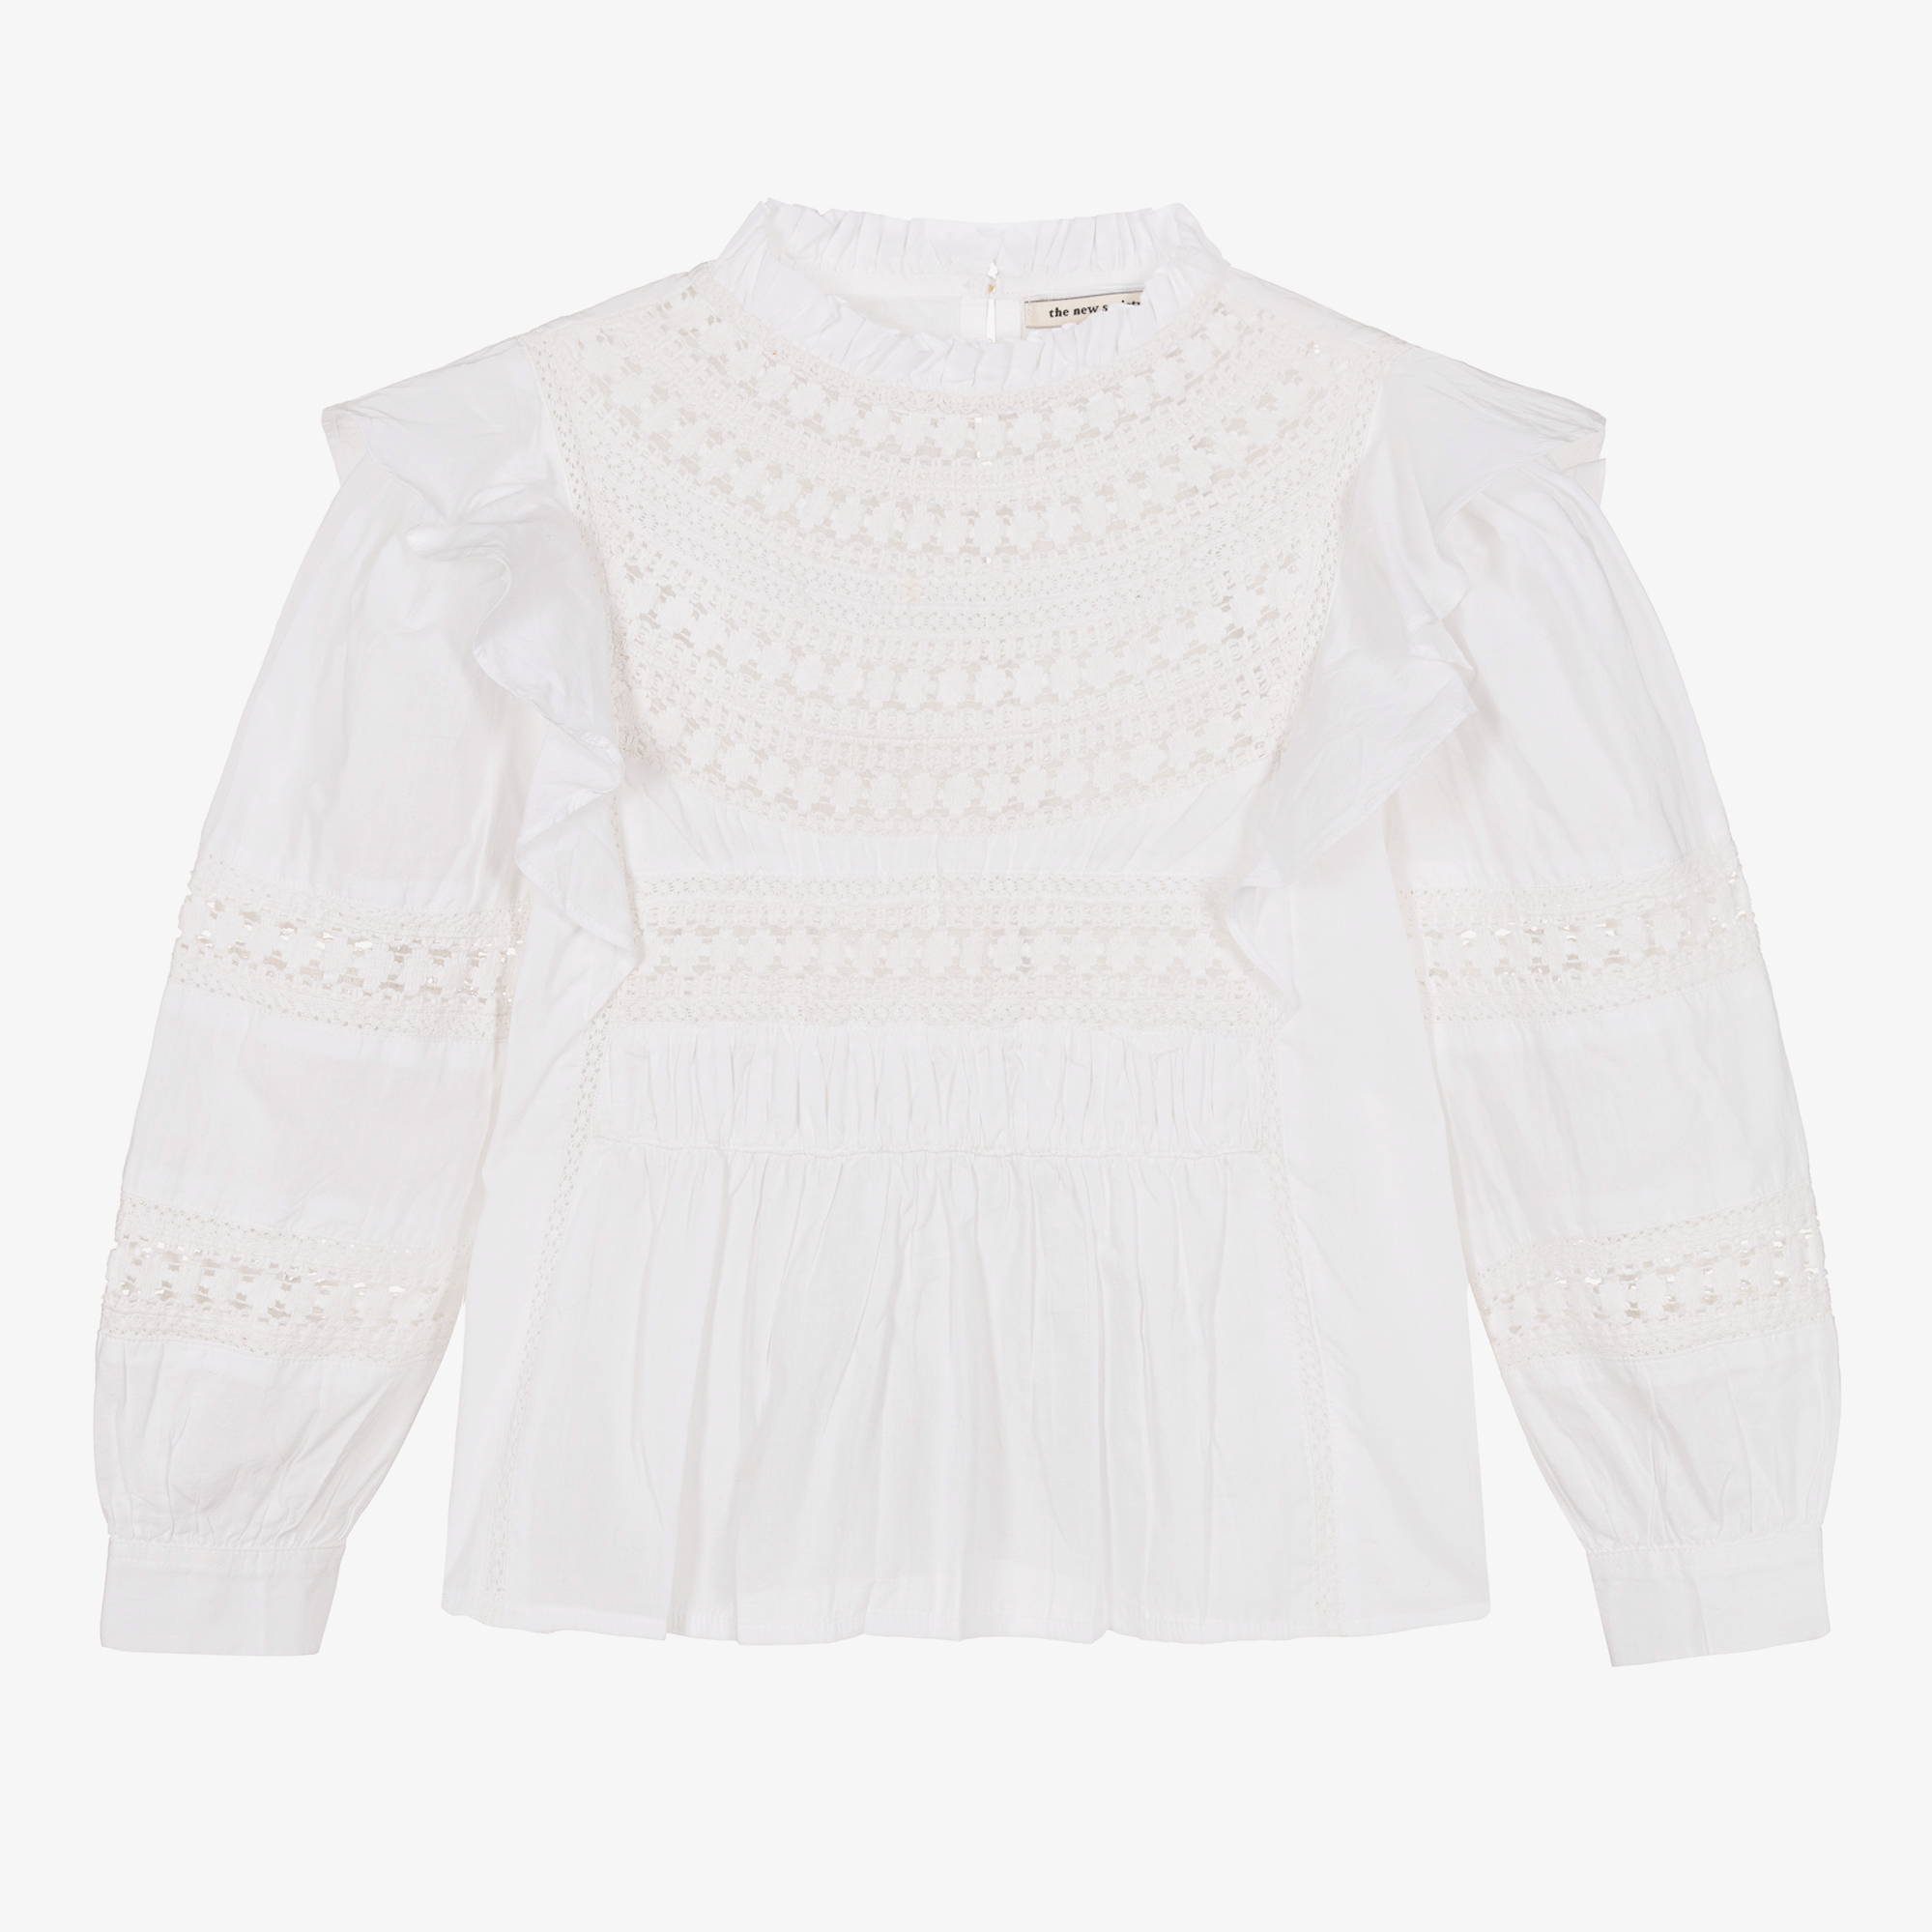 The New Society Girls White Cotton Lace & Ruffle Blouse